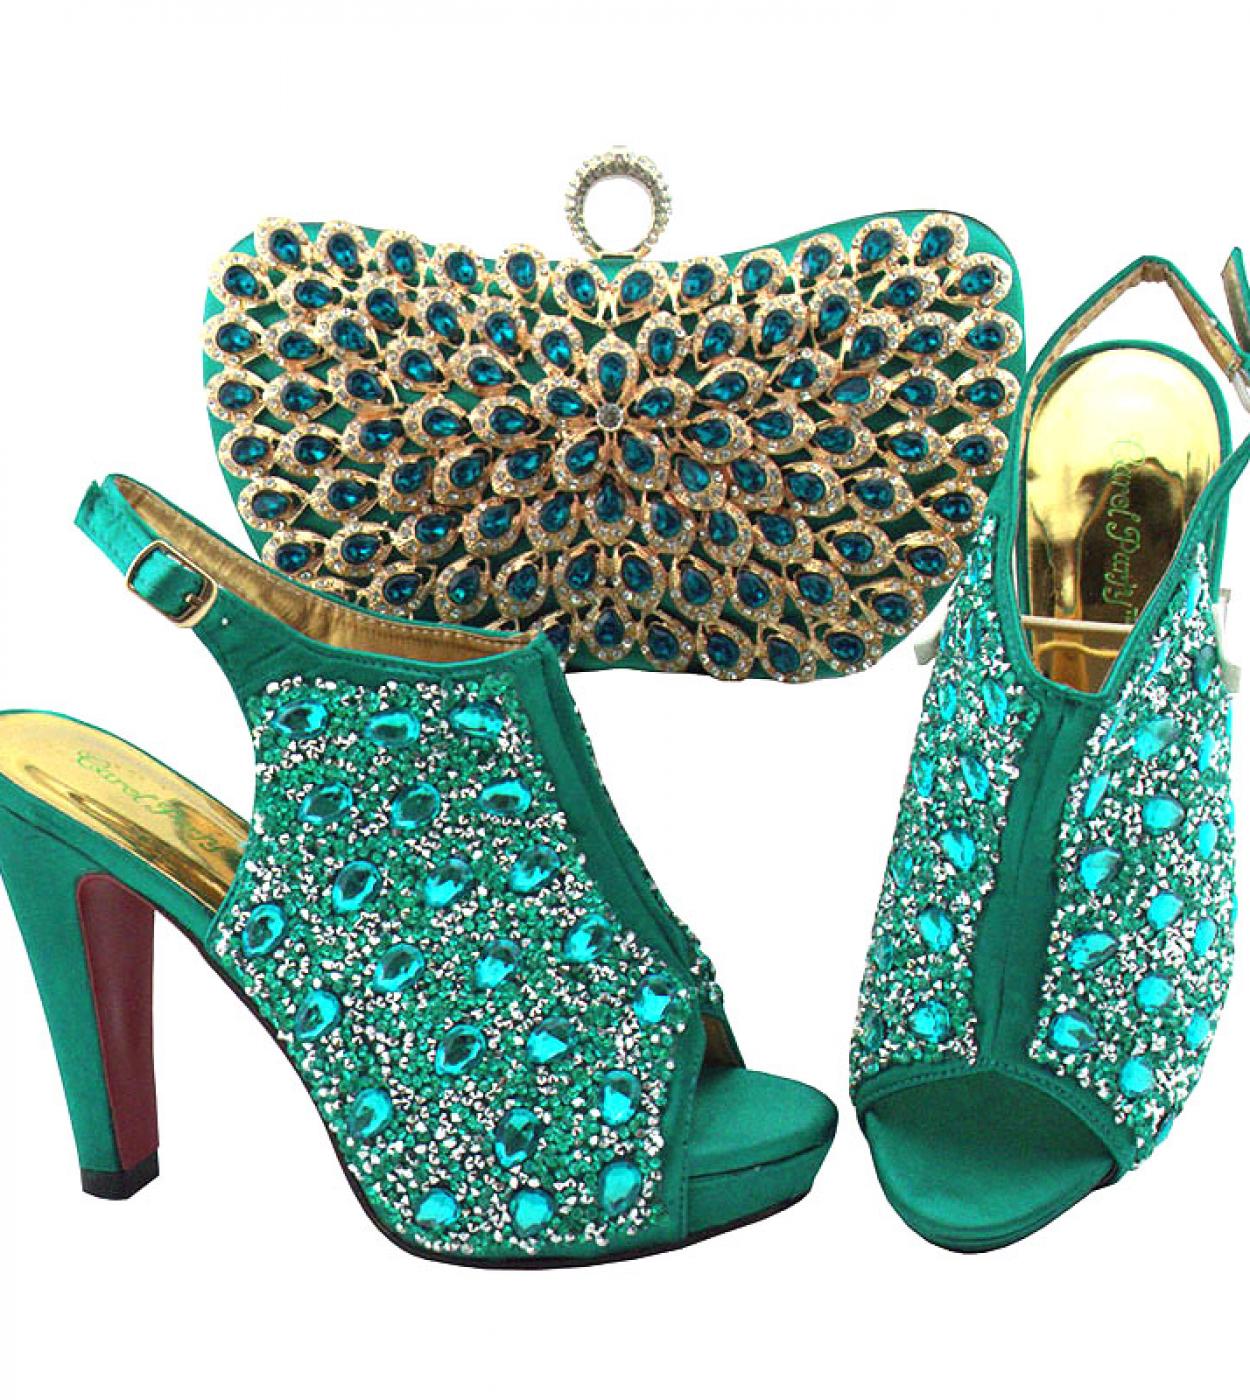 Pretty Leisure Style Italian Women Shoes And Bag In Teal Color Slingbacks African Lady Party Shoes And Bag  Pumps